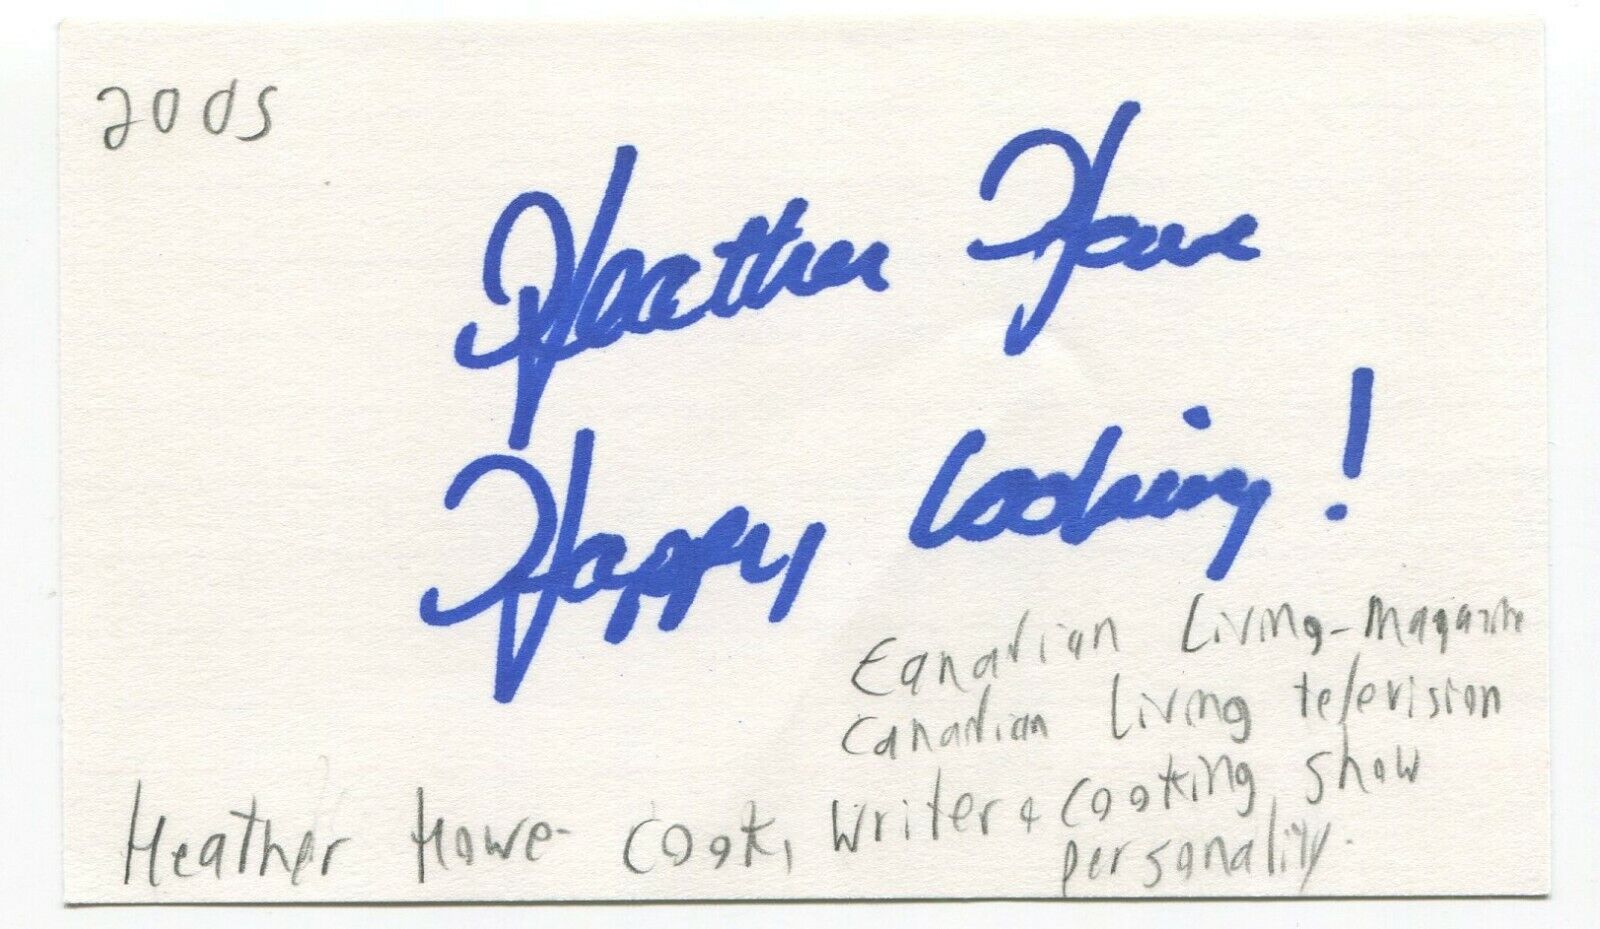 Heather Howe Signed 3x5 Index Card Autographed Chef Cook Canadian Living Host